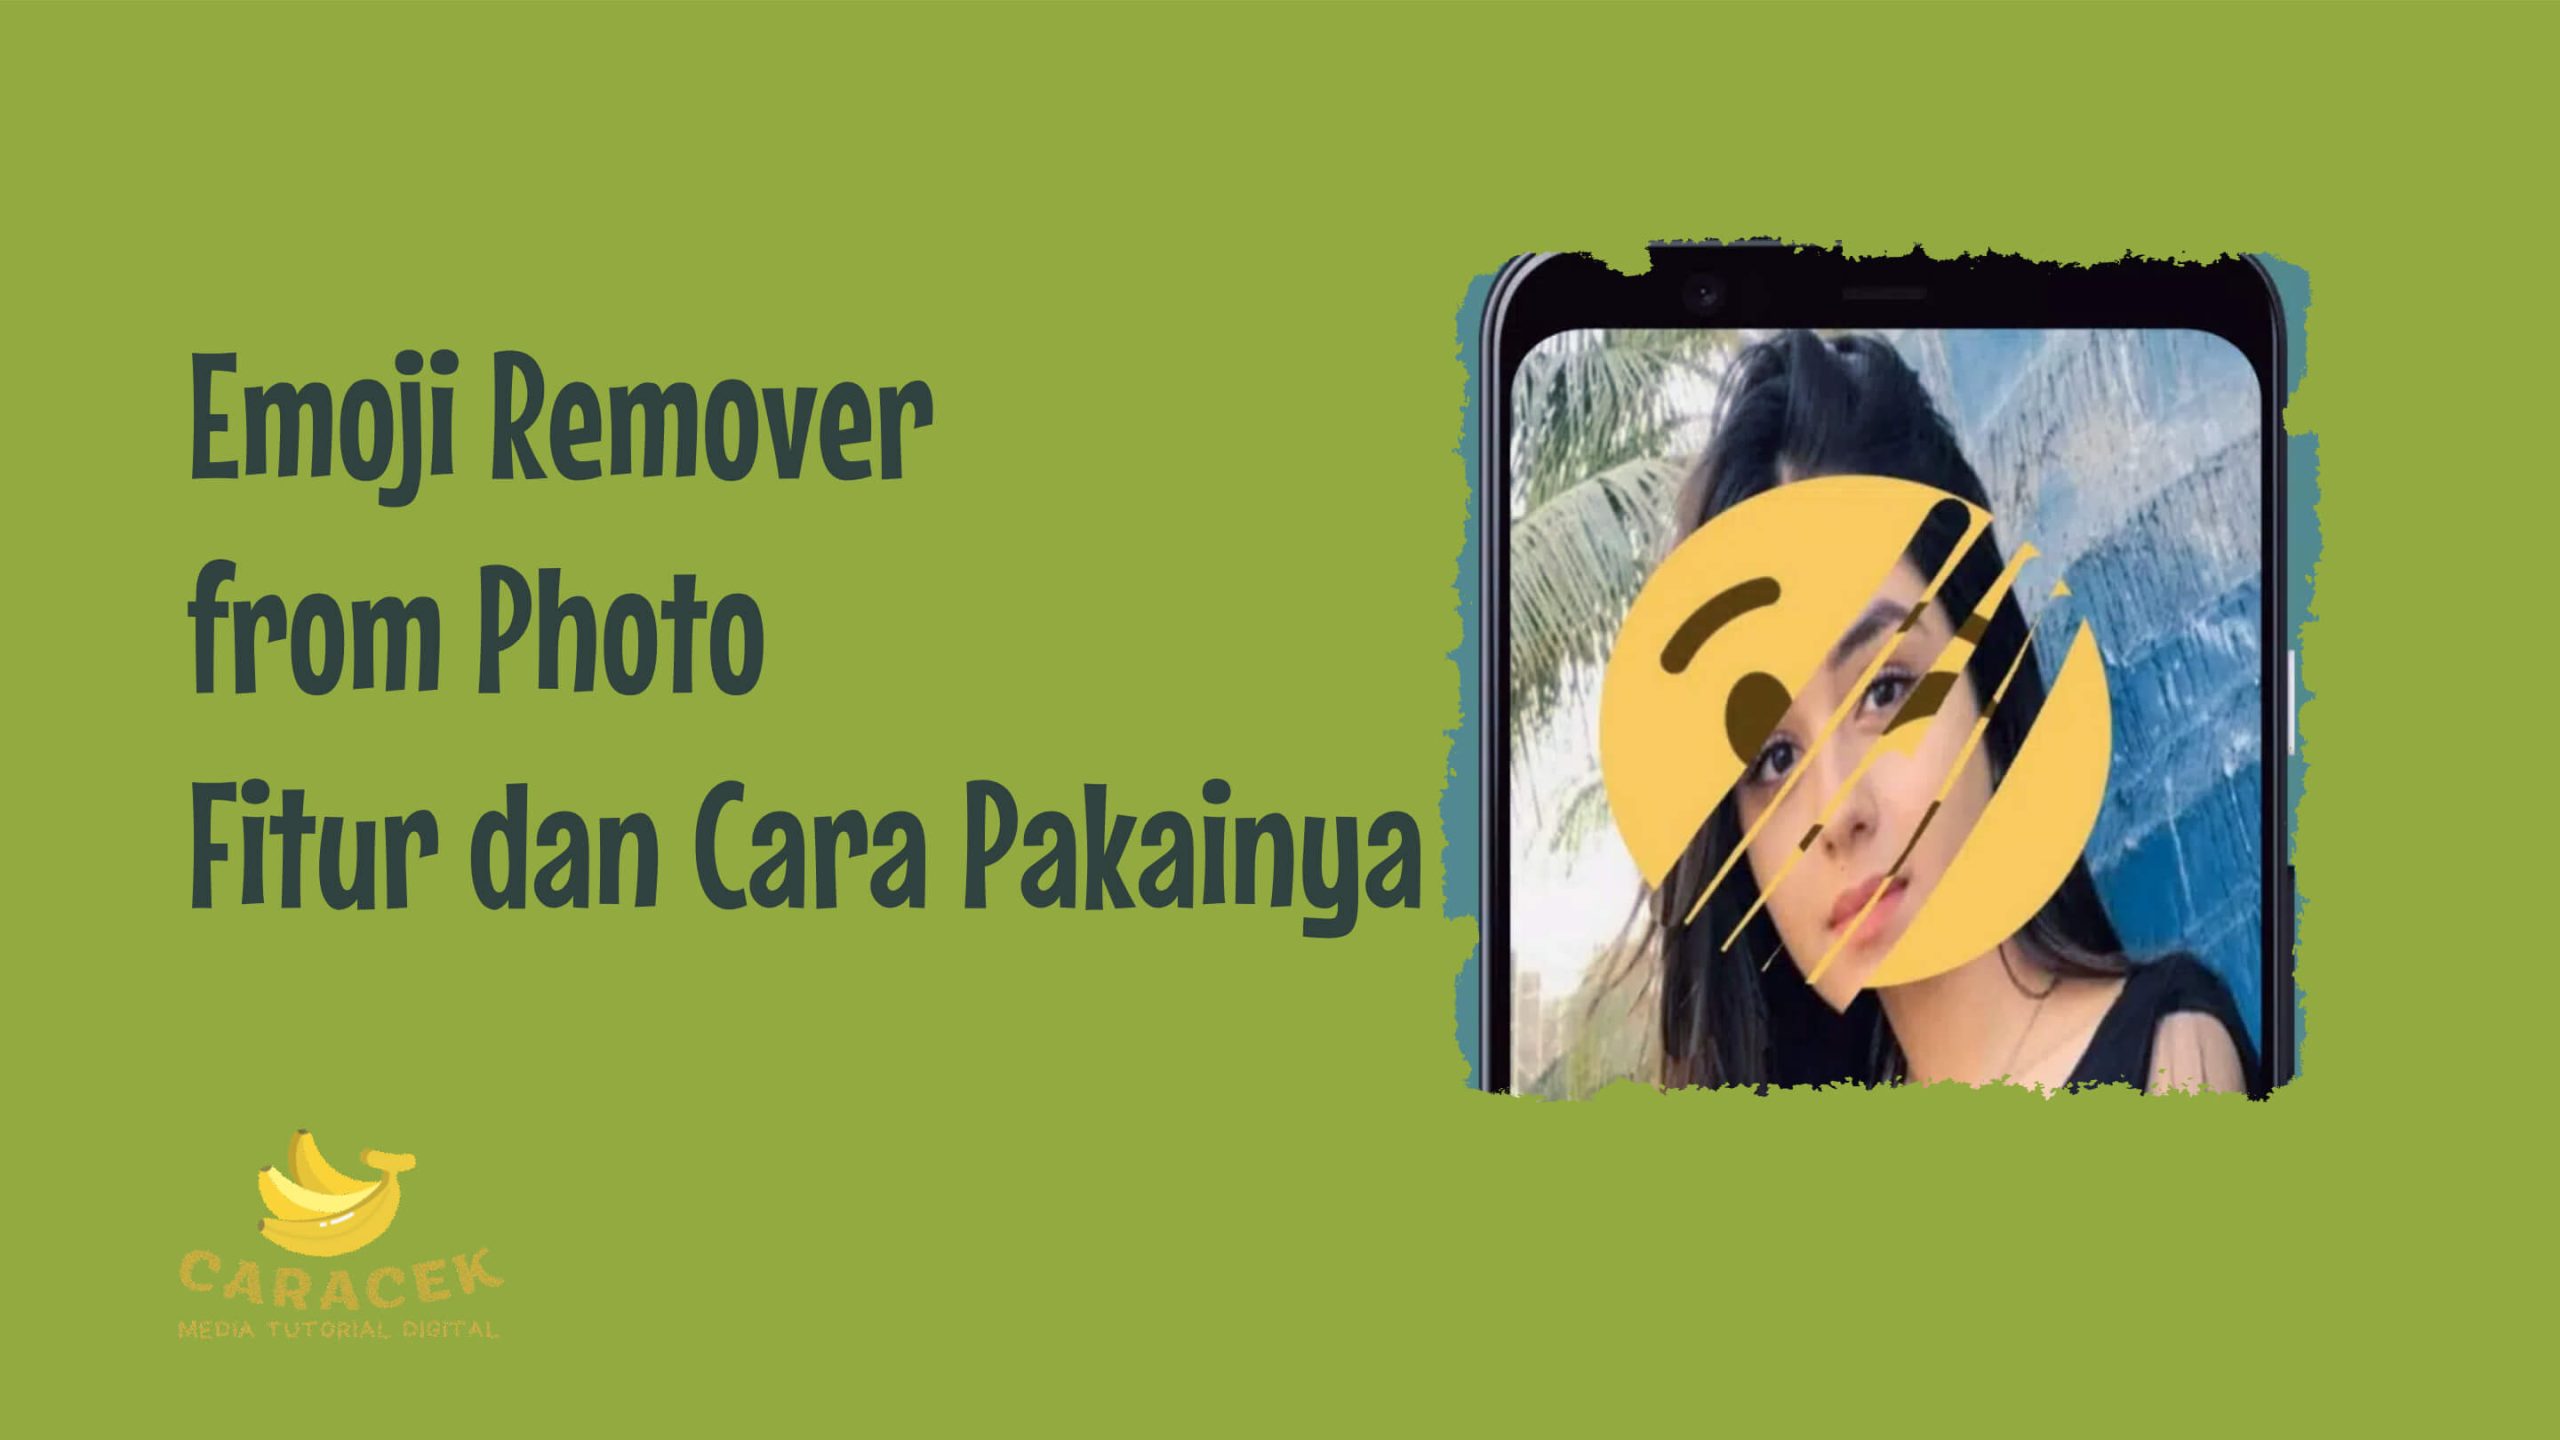 Emoji Remover from Photo